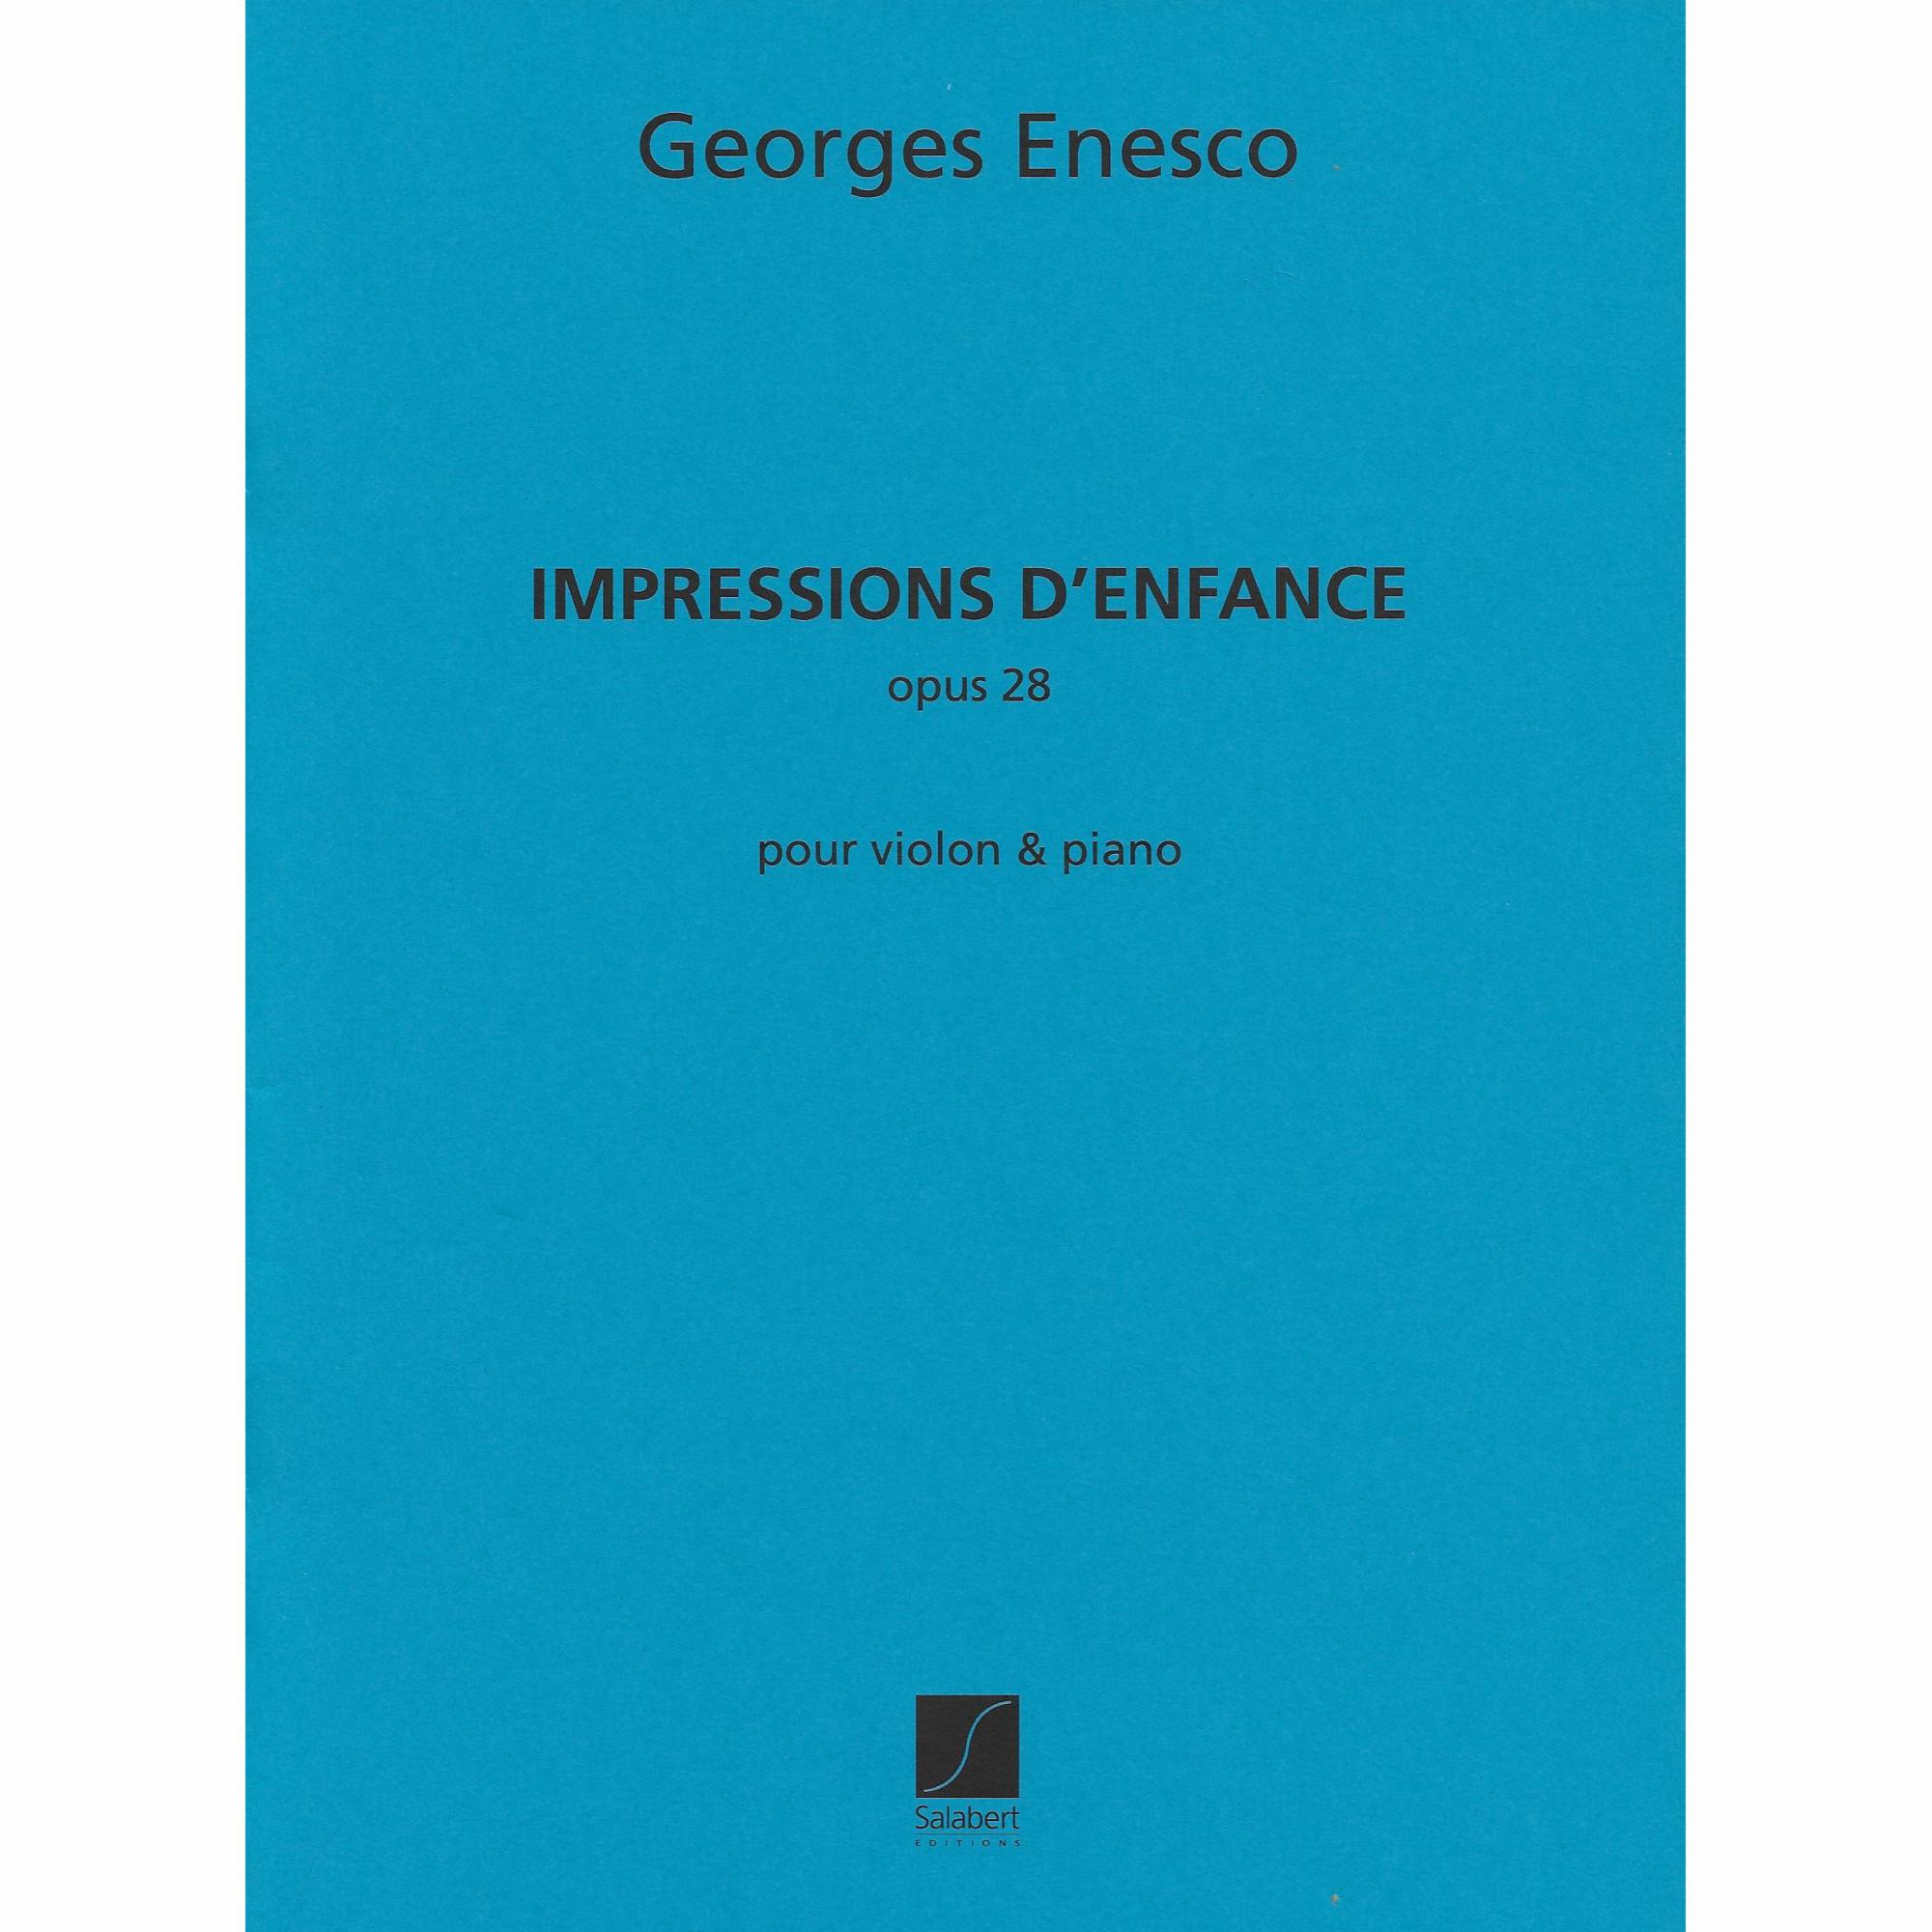 Enescu -- Impressions d'enfance, Op. 28 for Violin and Piano